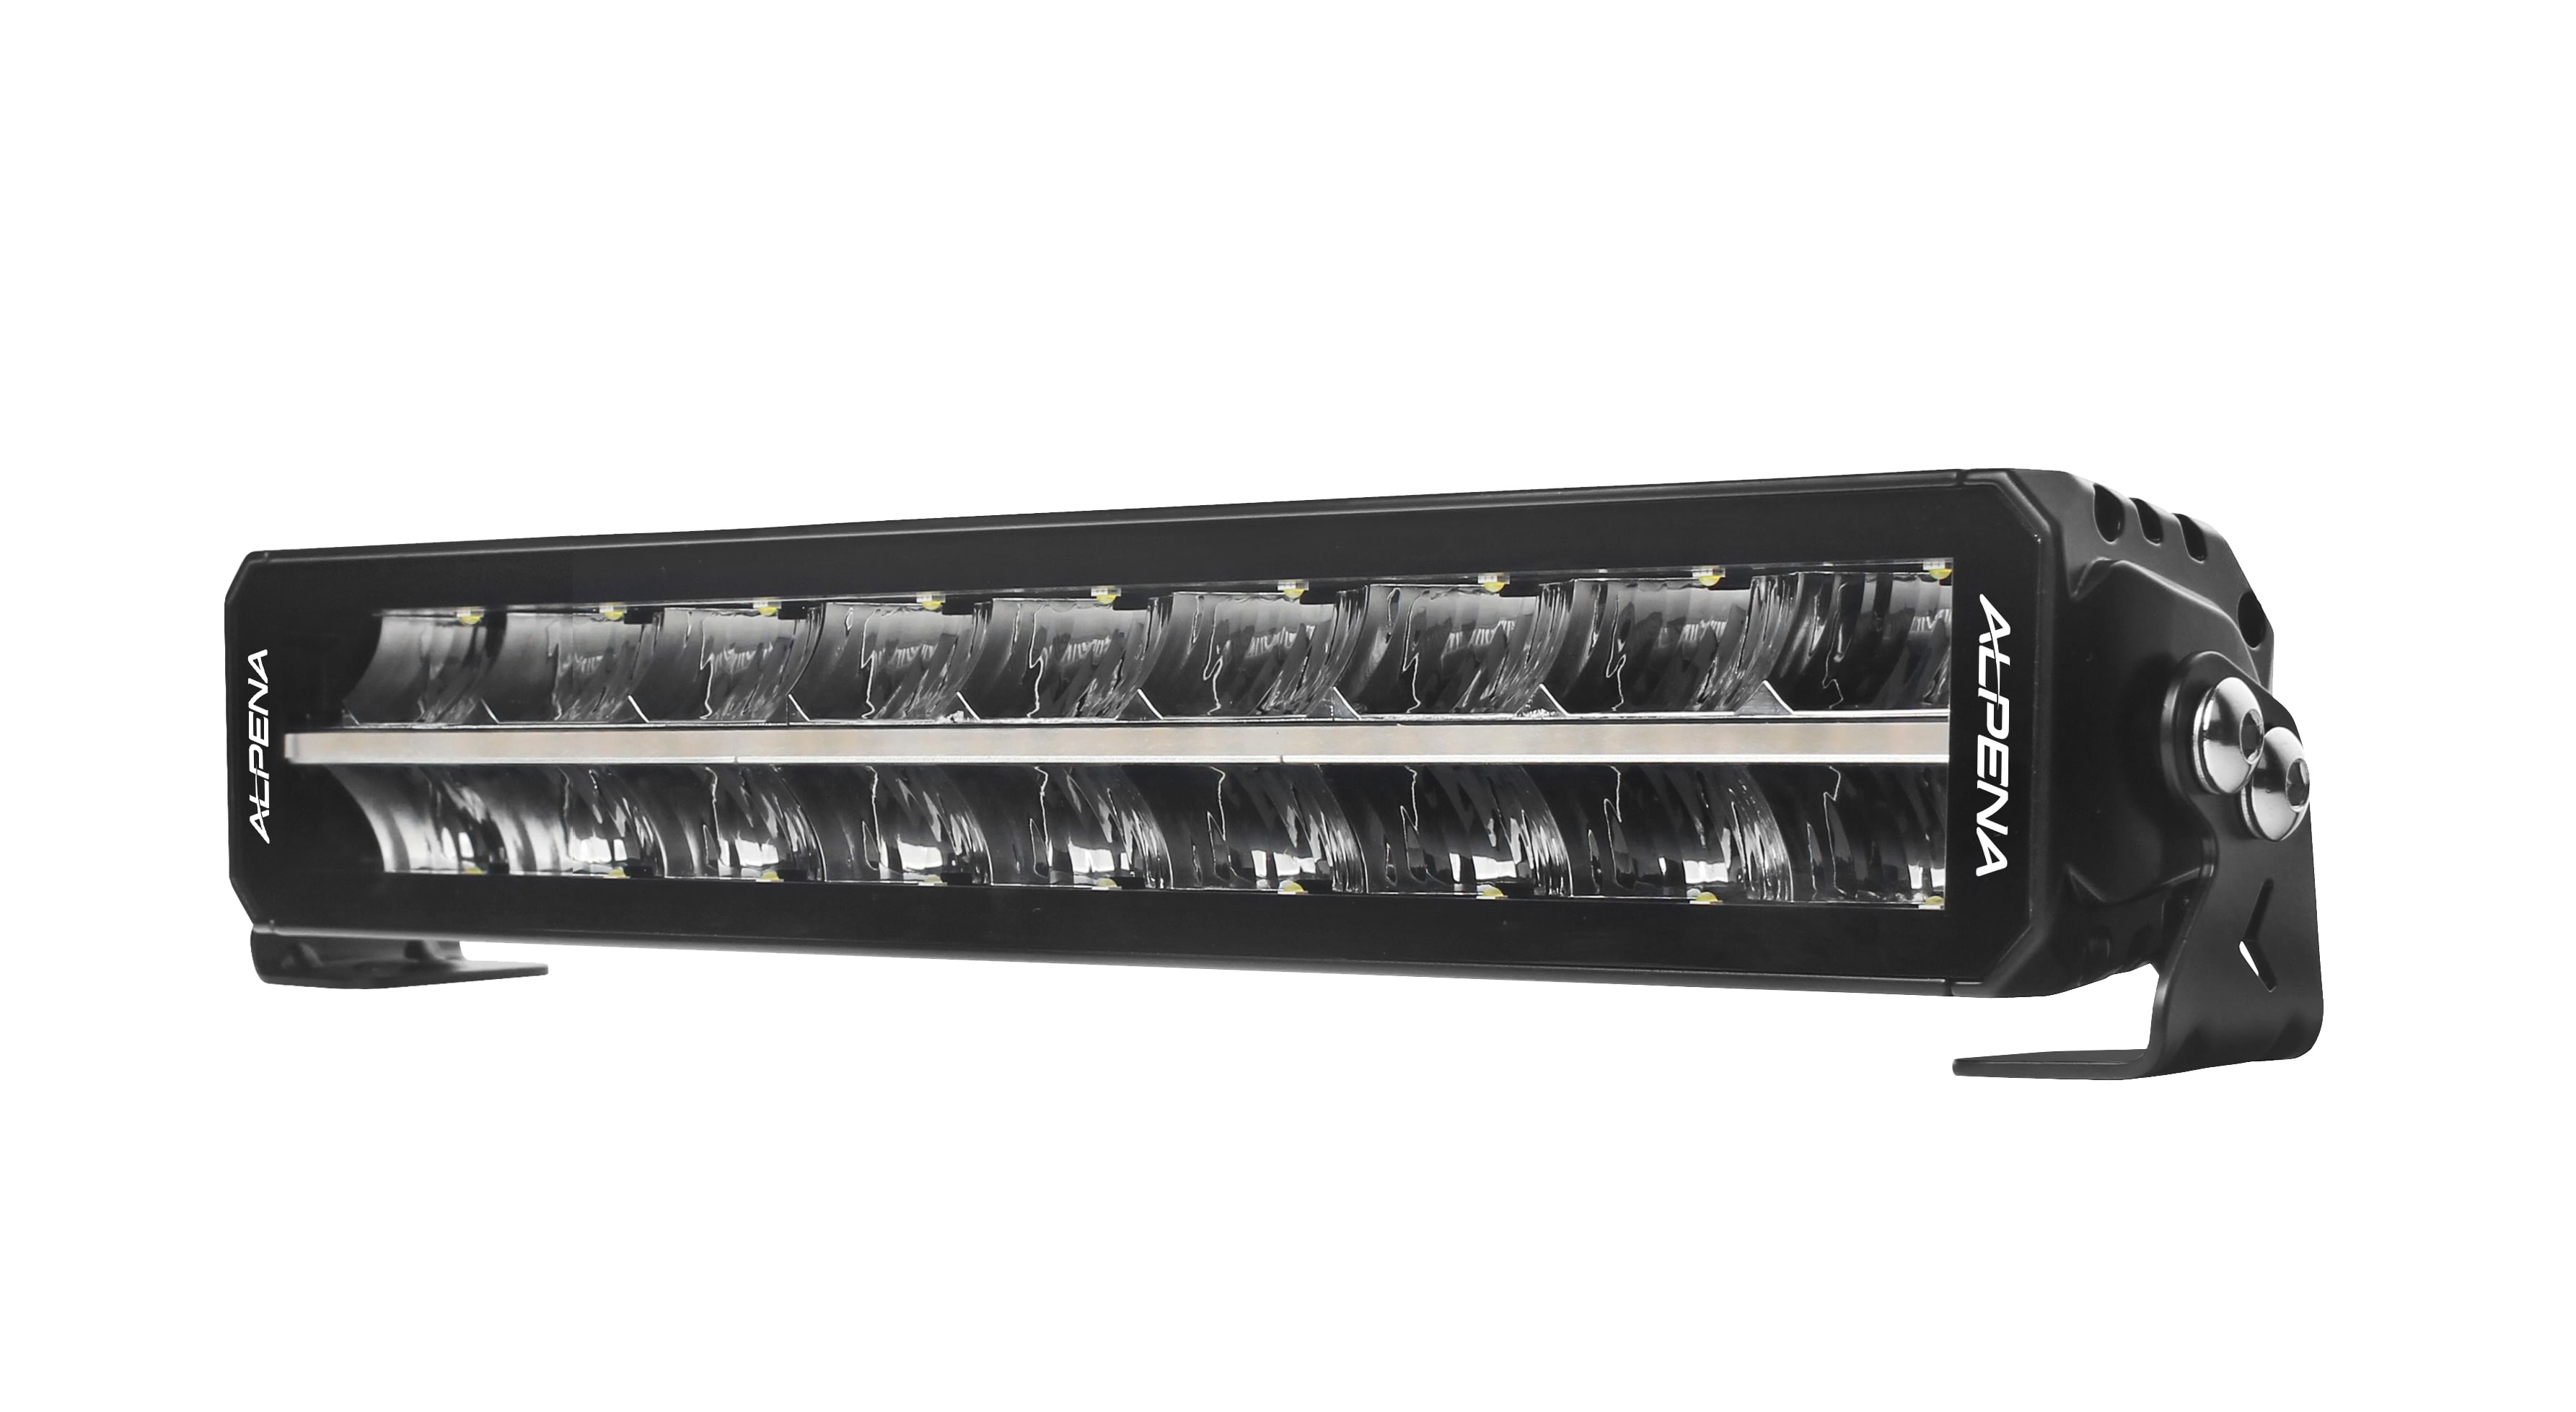 Alpena TrekTec D17P Driving & Accent Light Bar, Model 71069, Fit Type Universal for Cars, Trucks and SUVs -